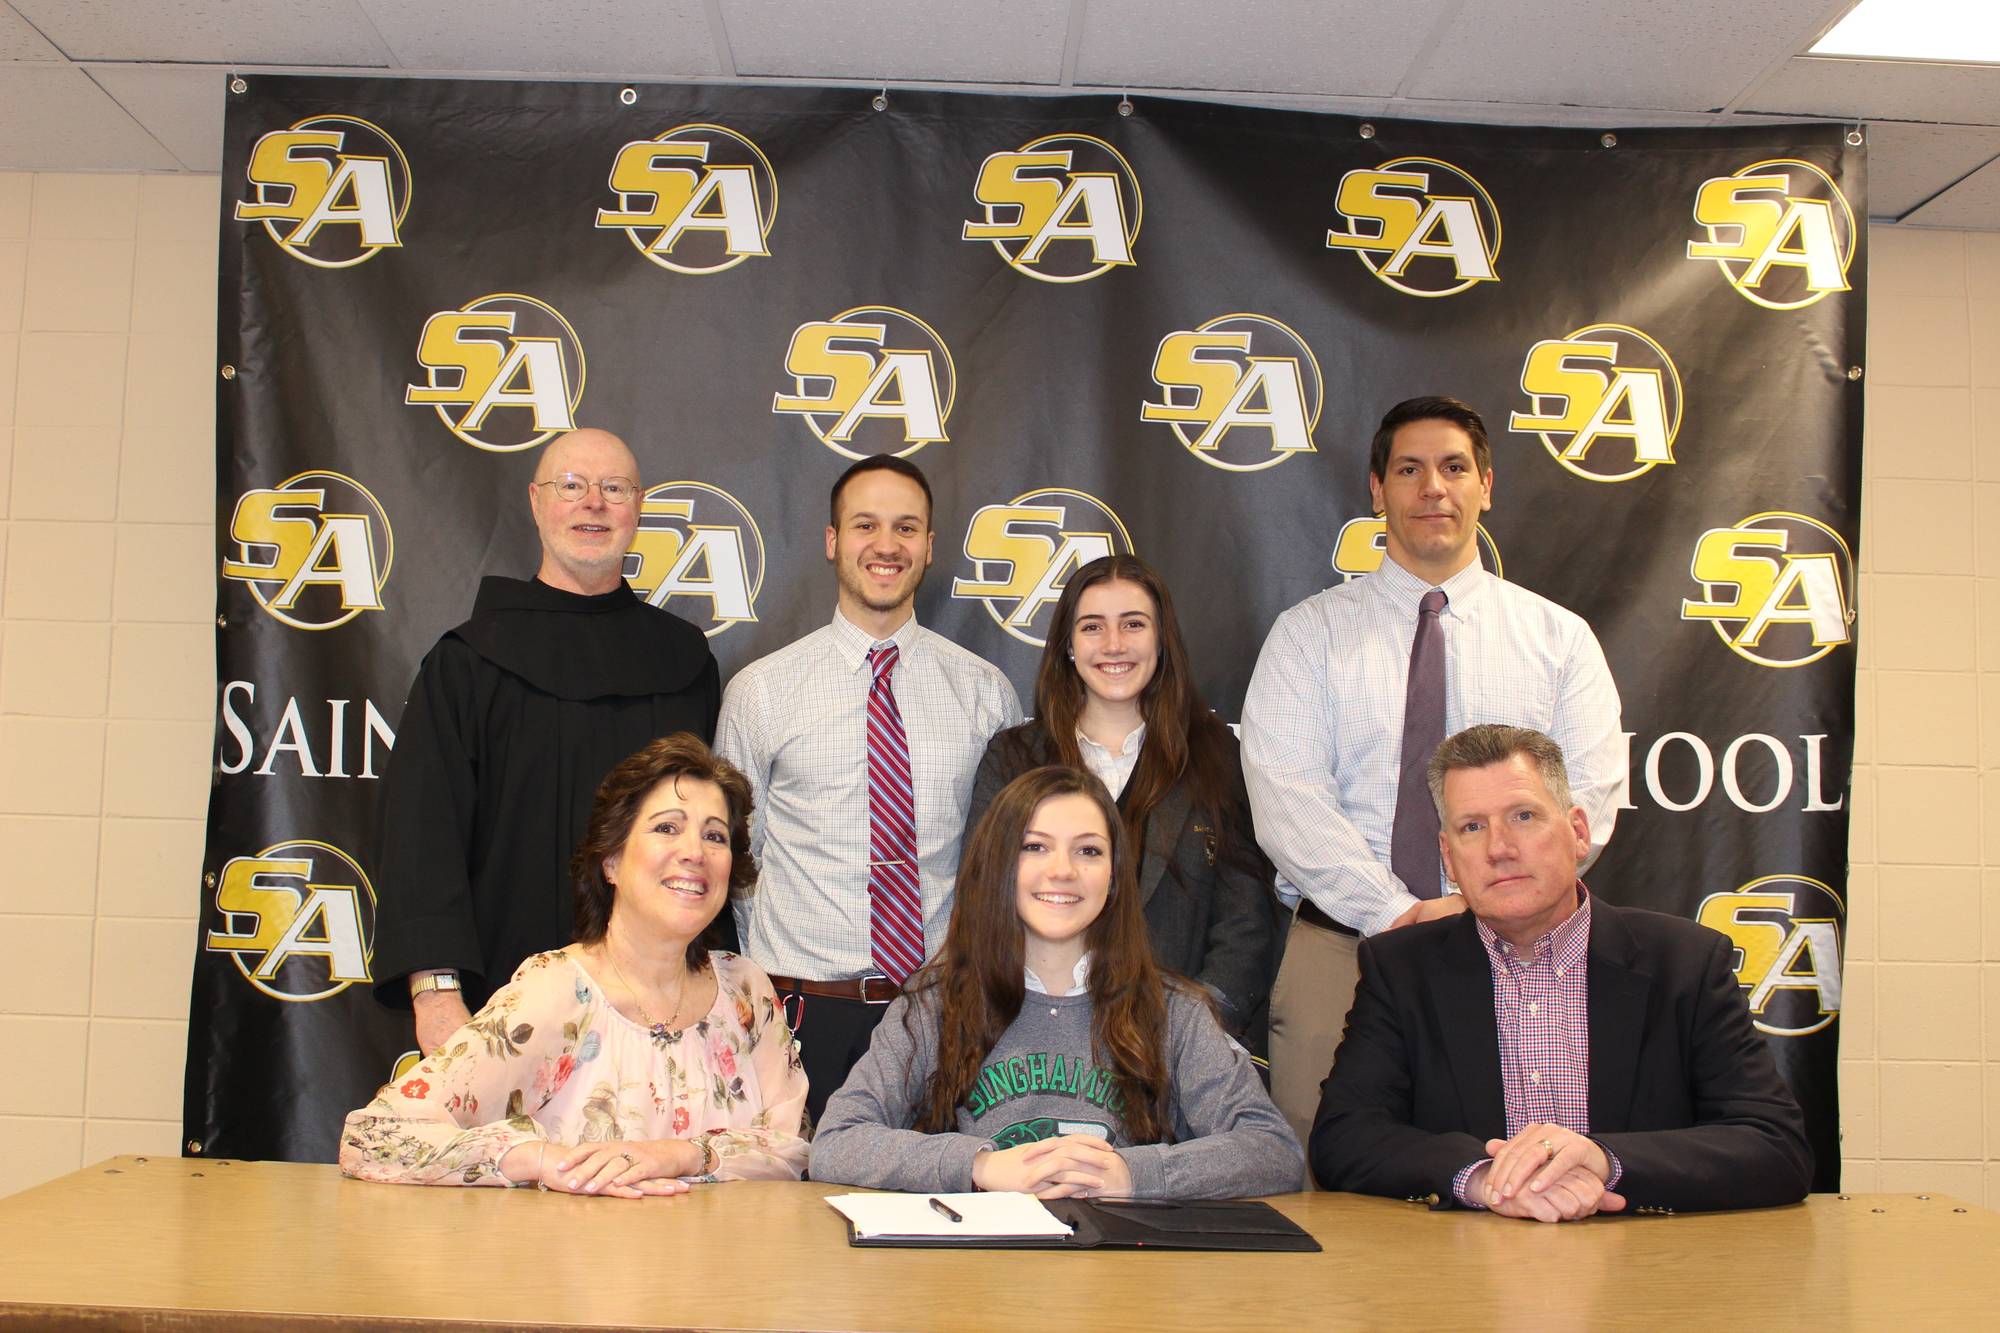 Congratulations Emily Rail committed to SUNY Binghamton to play volleyball